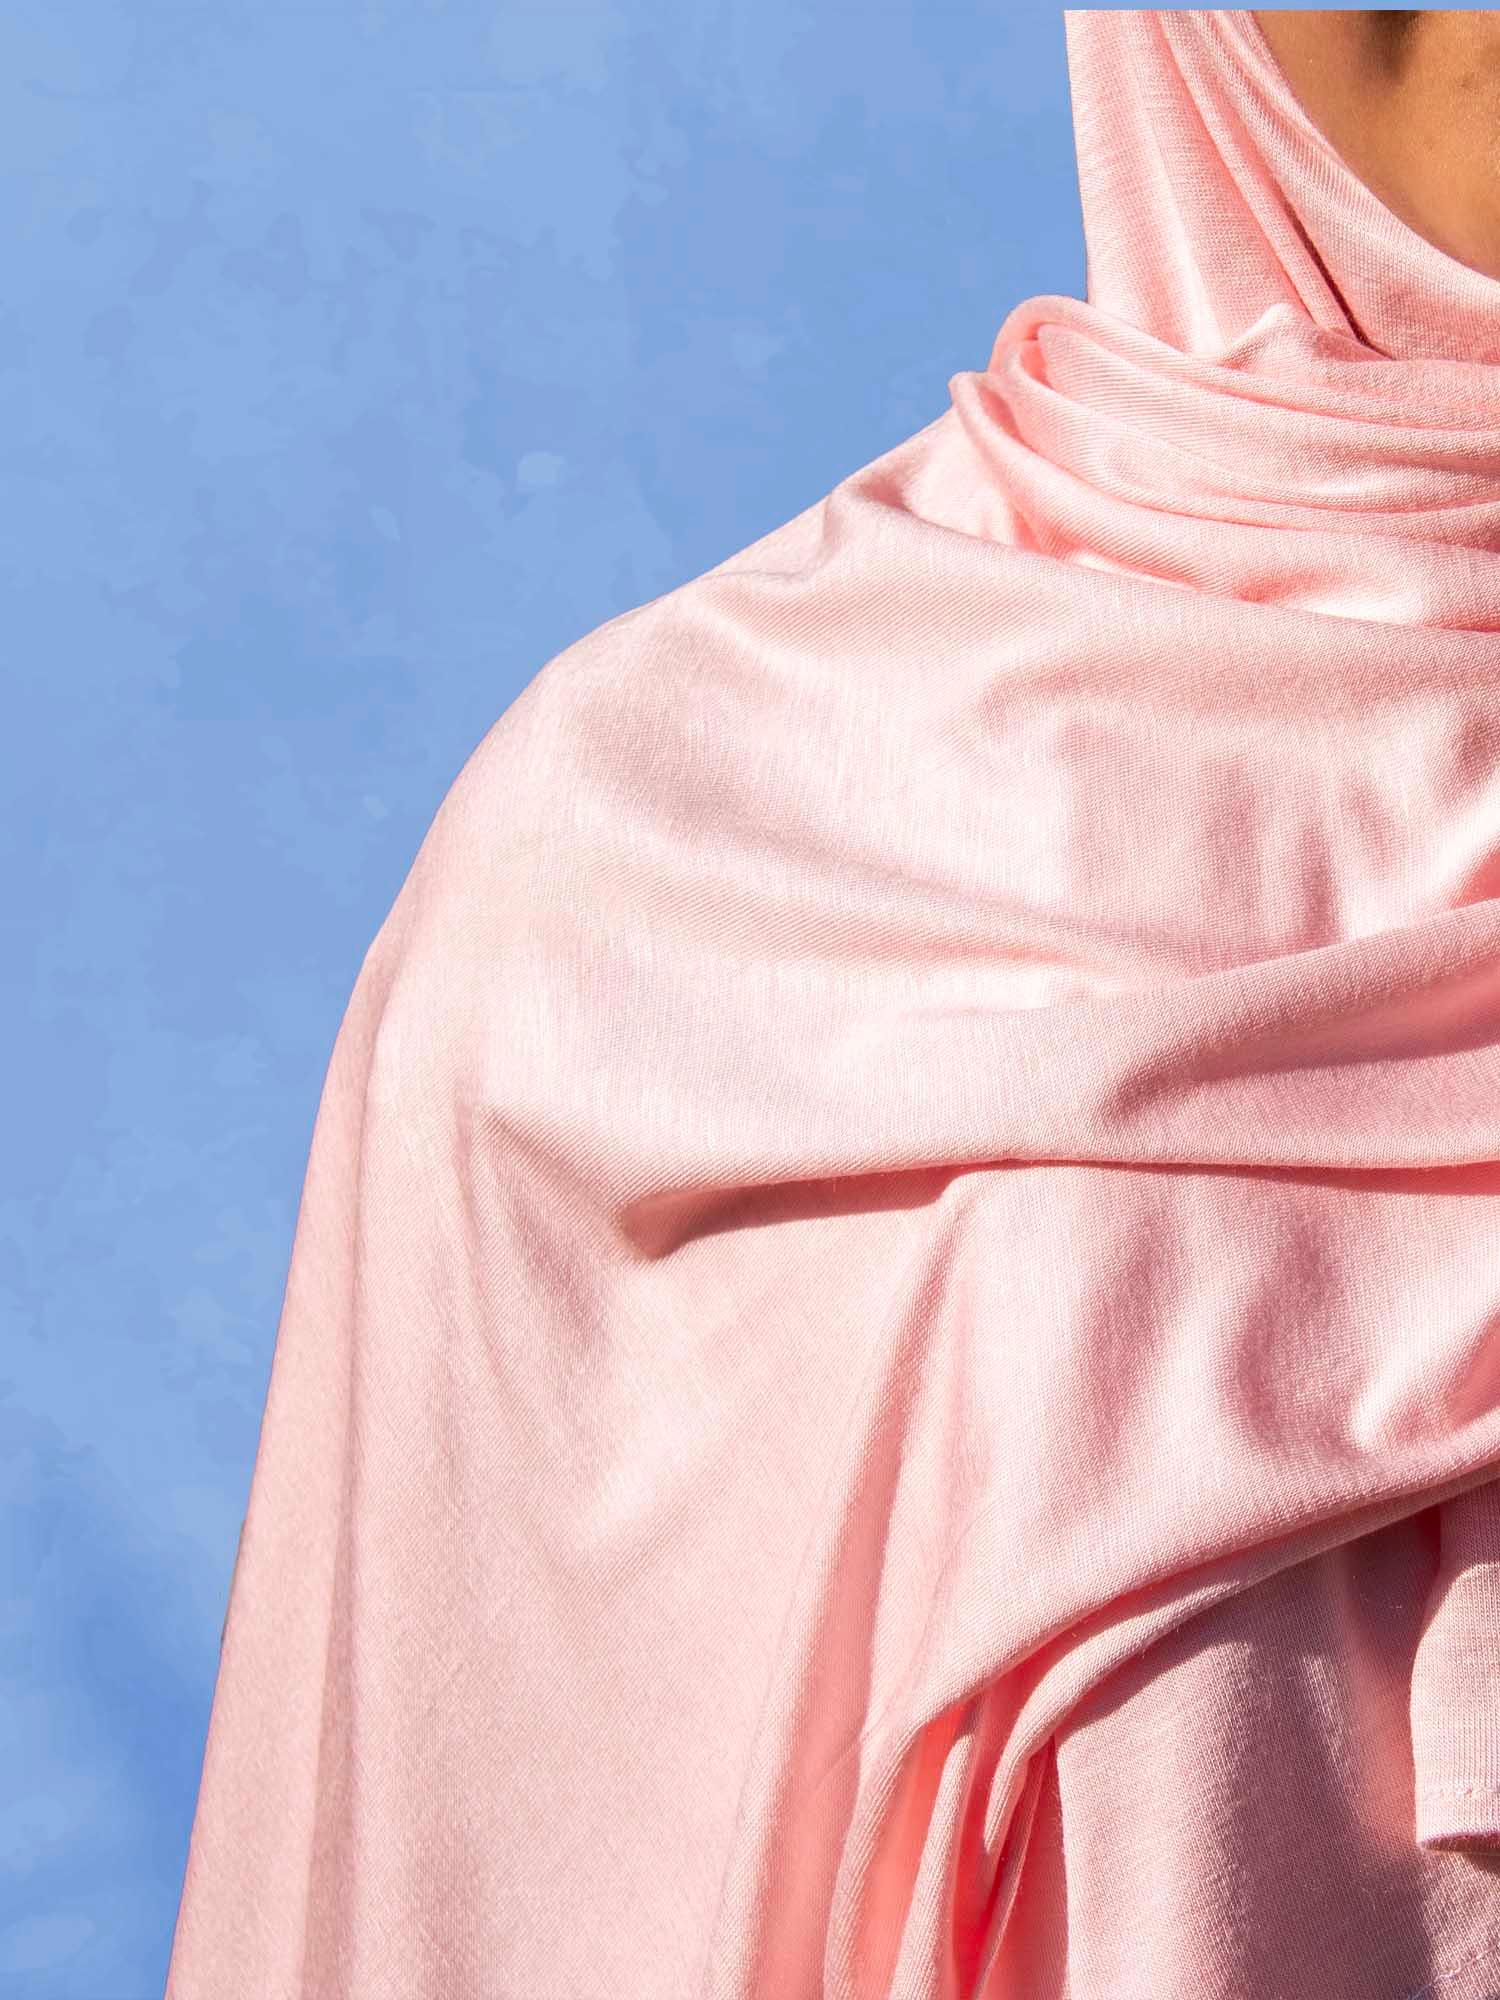 SoftTouch Perfect Fit Hijab in Cotton Candy Dreams - BubbleGirl